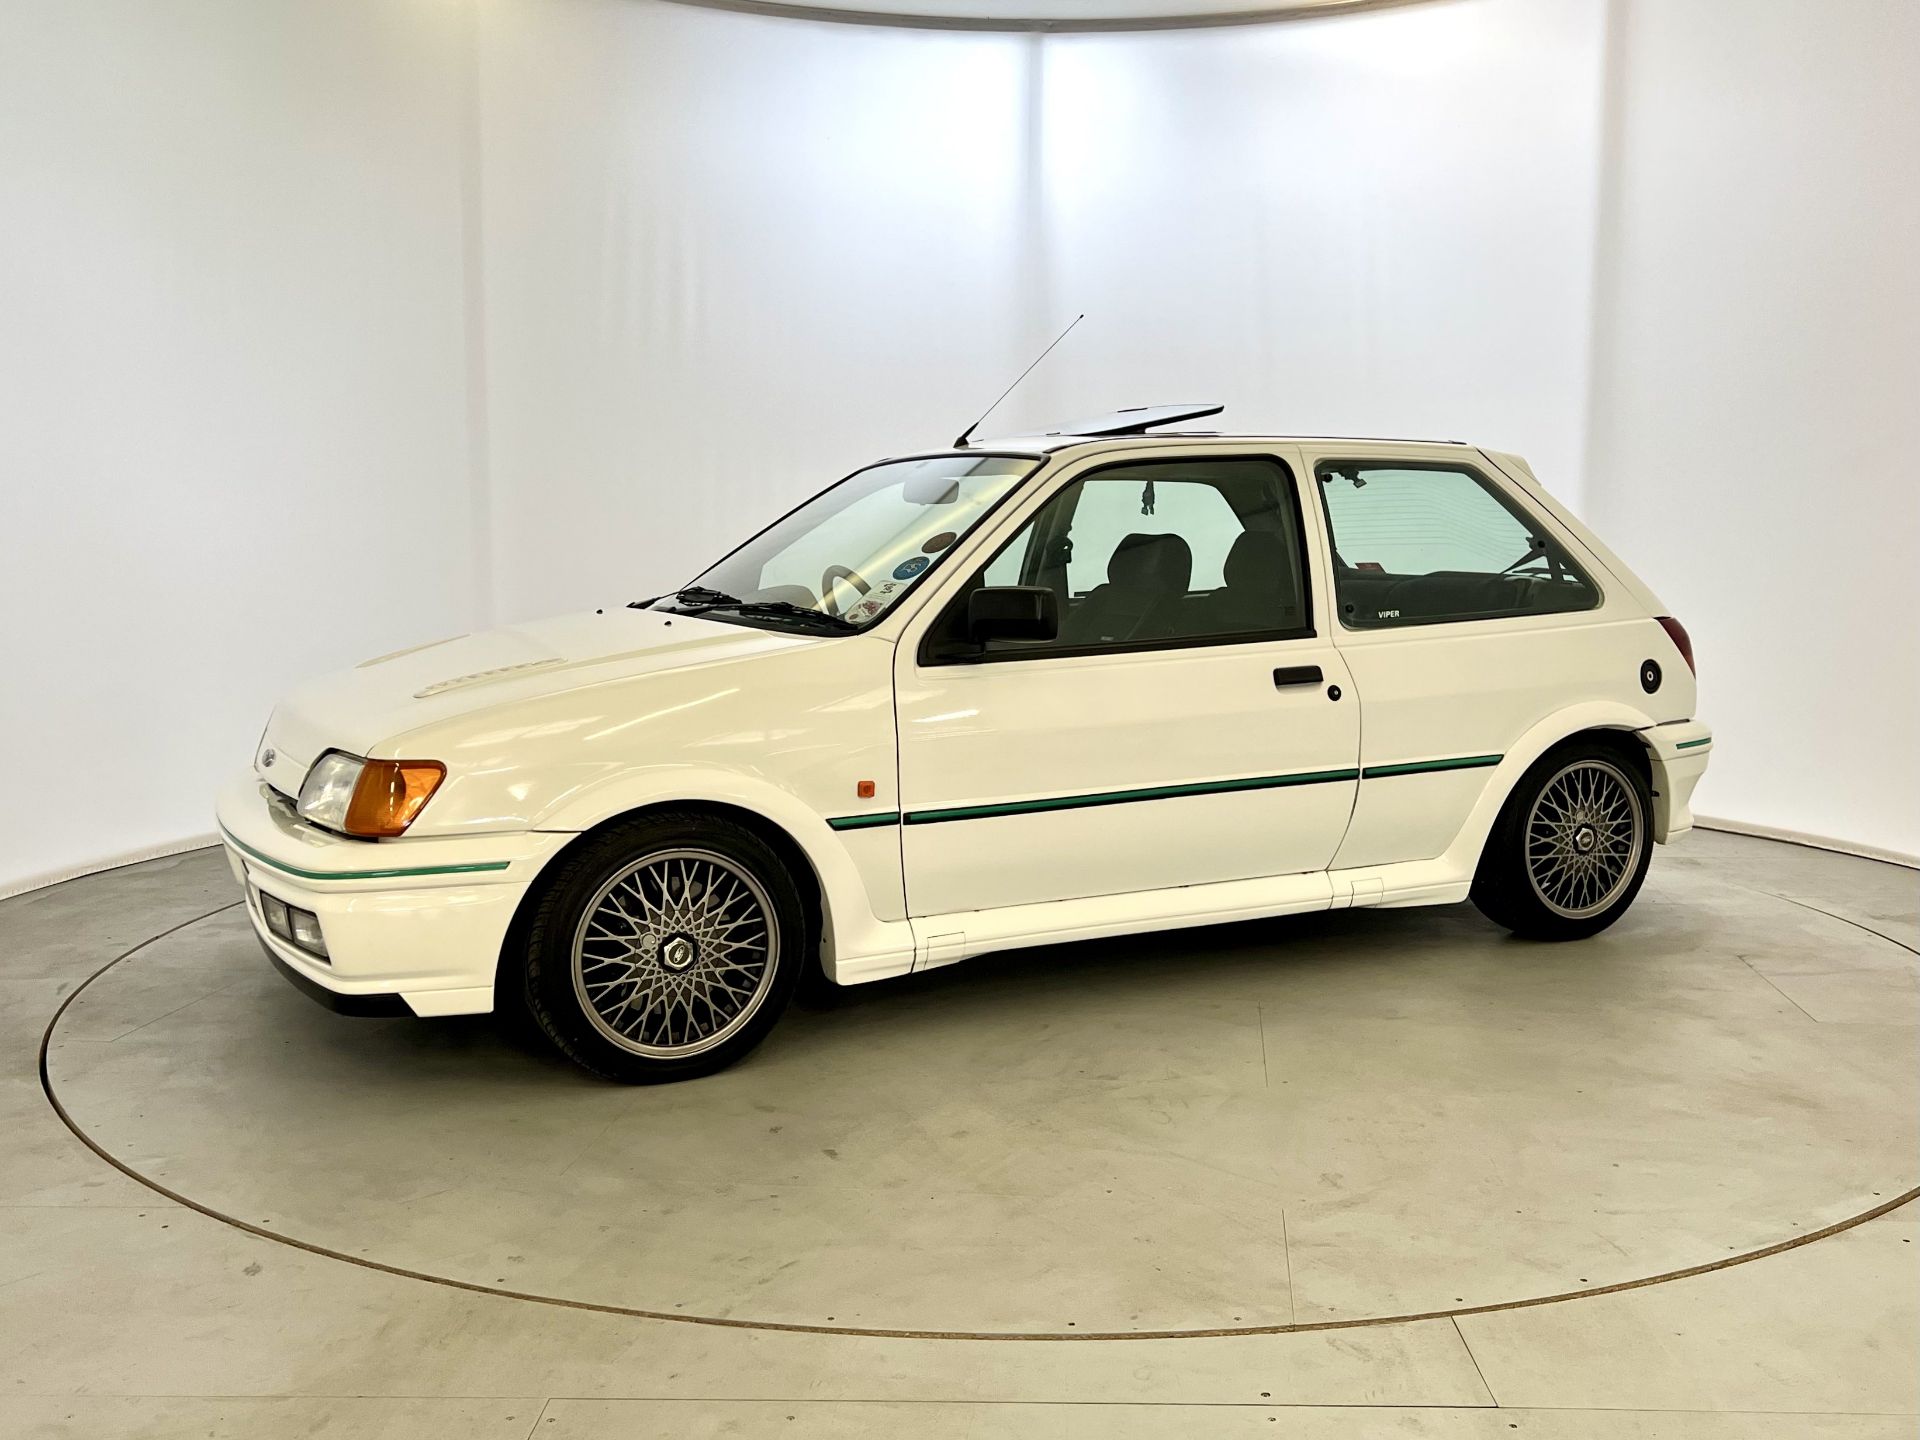 Ford Fiesta RS Turbo - Image 4 of 26